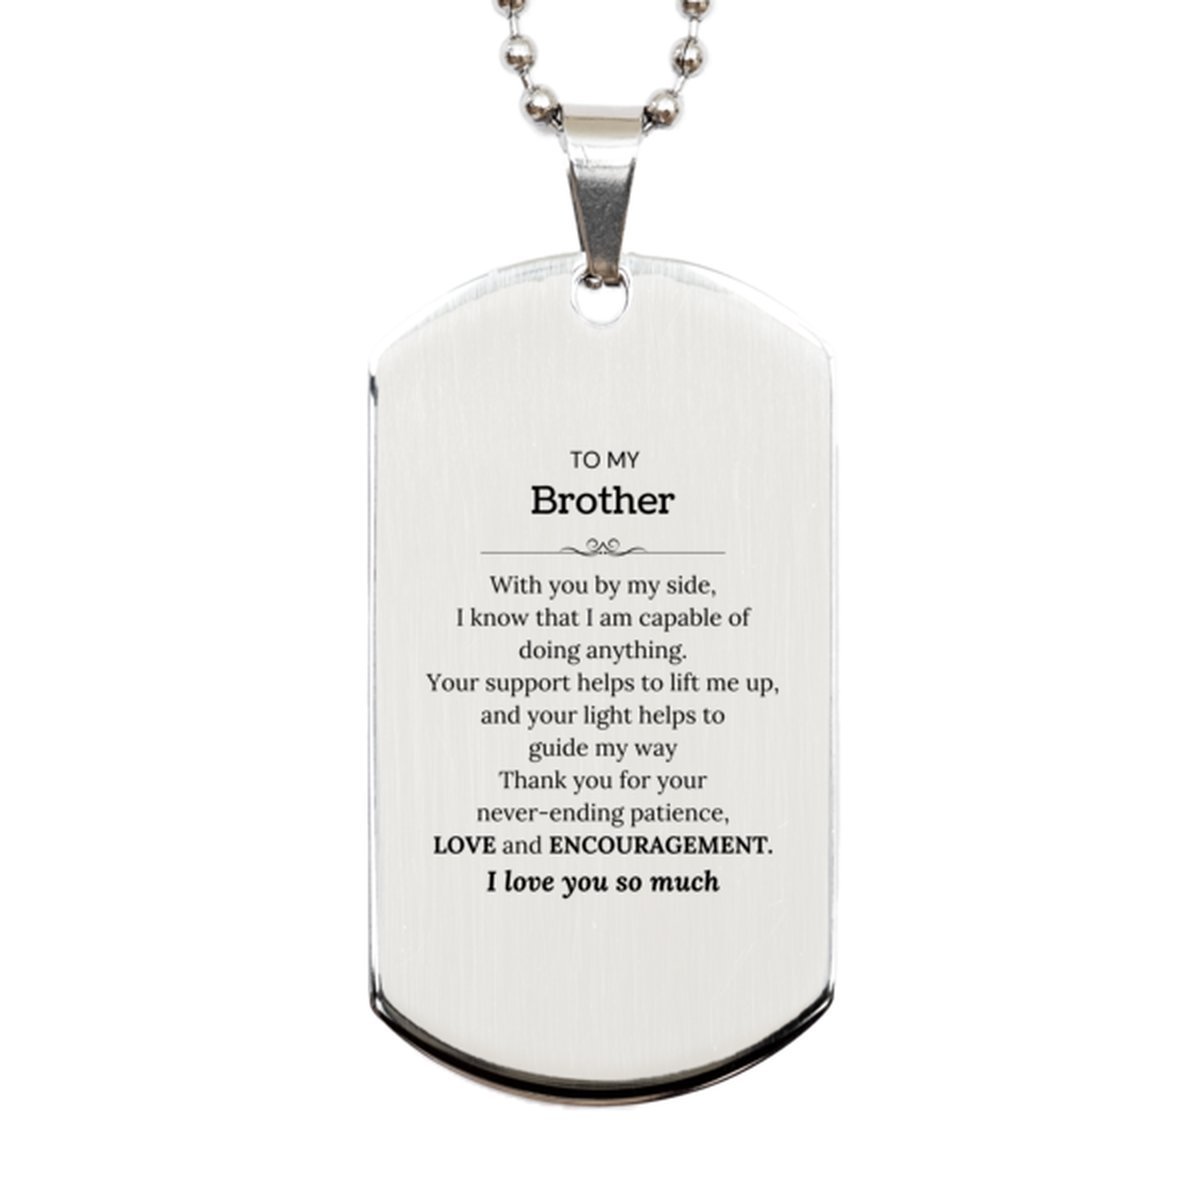 Appreciation Brother Silver Dog Tag Gifts, To My Brother Birthday Christmas Wedding Keepsake Gifts for Brother With you by my side, I know that I am capable of doing anything. I love you so much